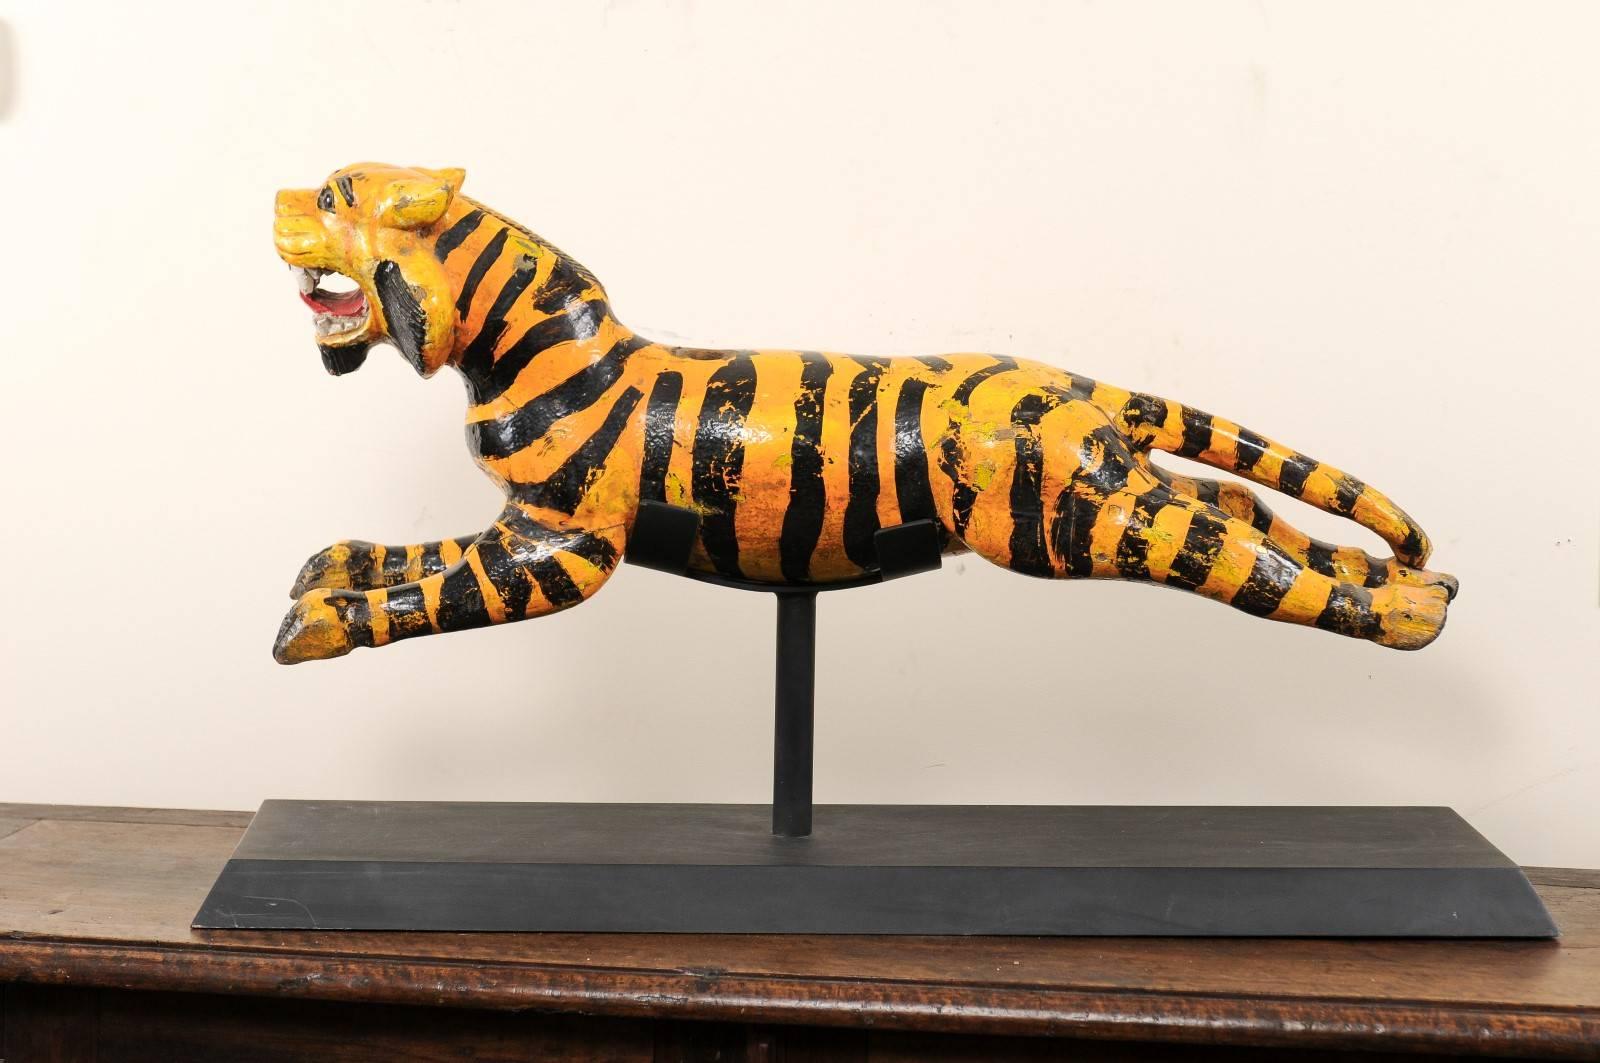 A vintage Southeast Asian carousel tiger. This whimsical tiger was originally part of a merry-go-round during the mid to later part of the 20th century. The tiger has the appearance of being in mid-run, open mouthed and bearing its teeth. It is made